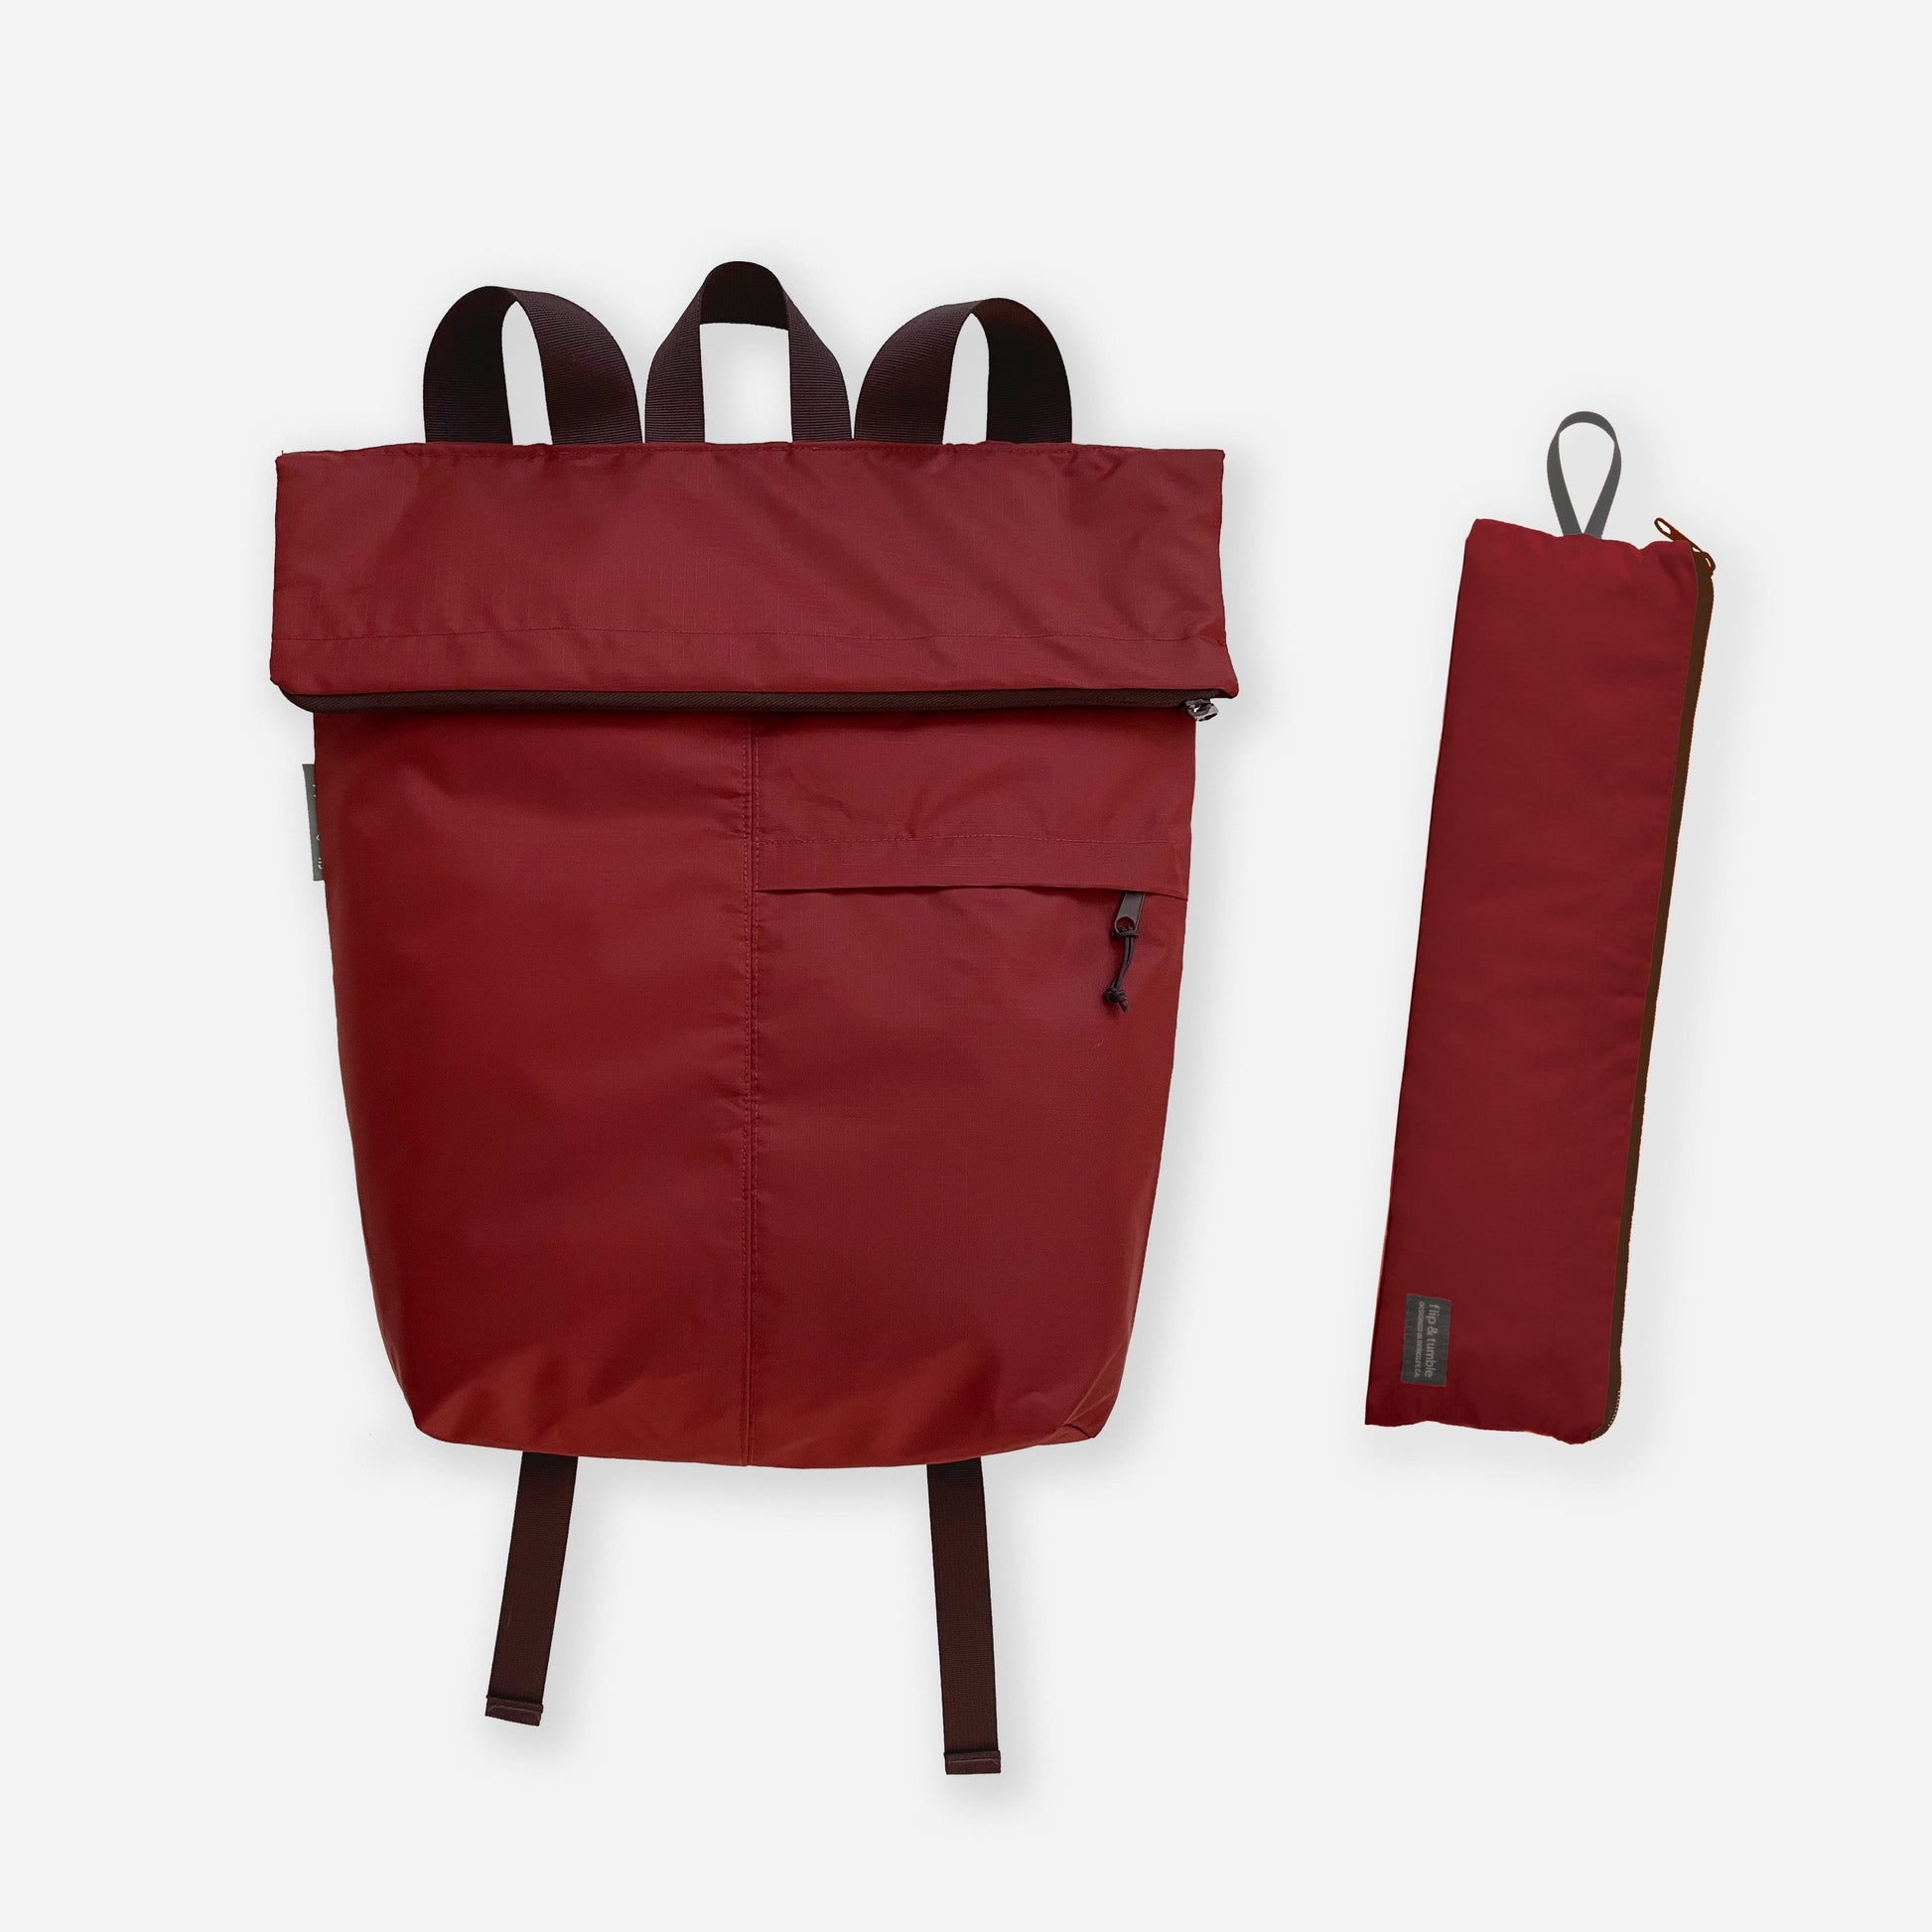 red foldable backpack for travel - flip & tumble - best packable backpack for travel, this packable foldable rucksack style is great for travel